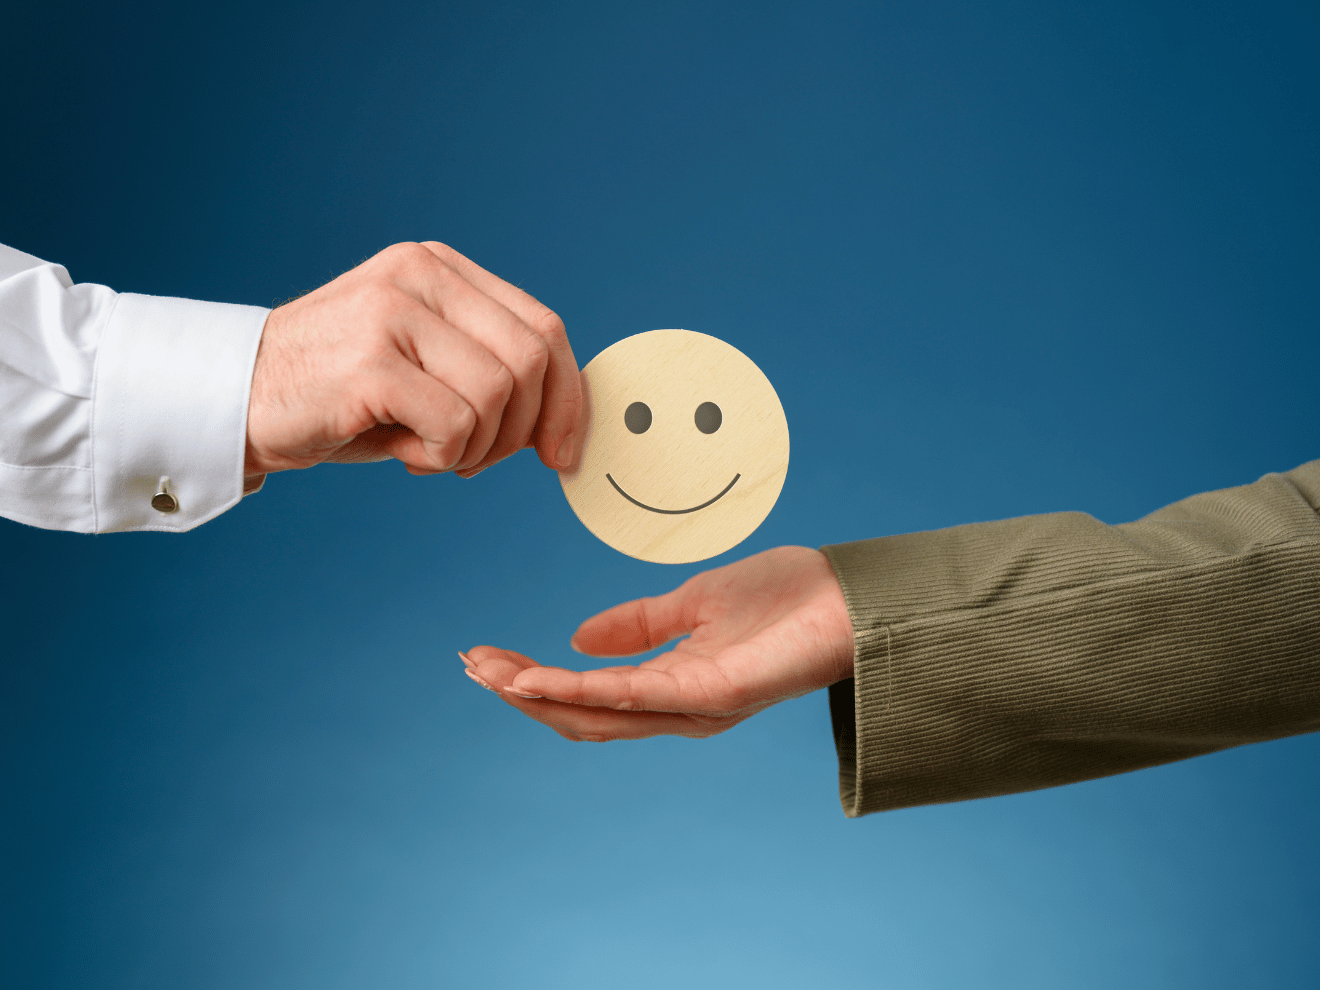 How To Show Empathy In Customer Service (6 Best Practices)